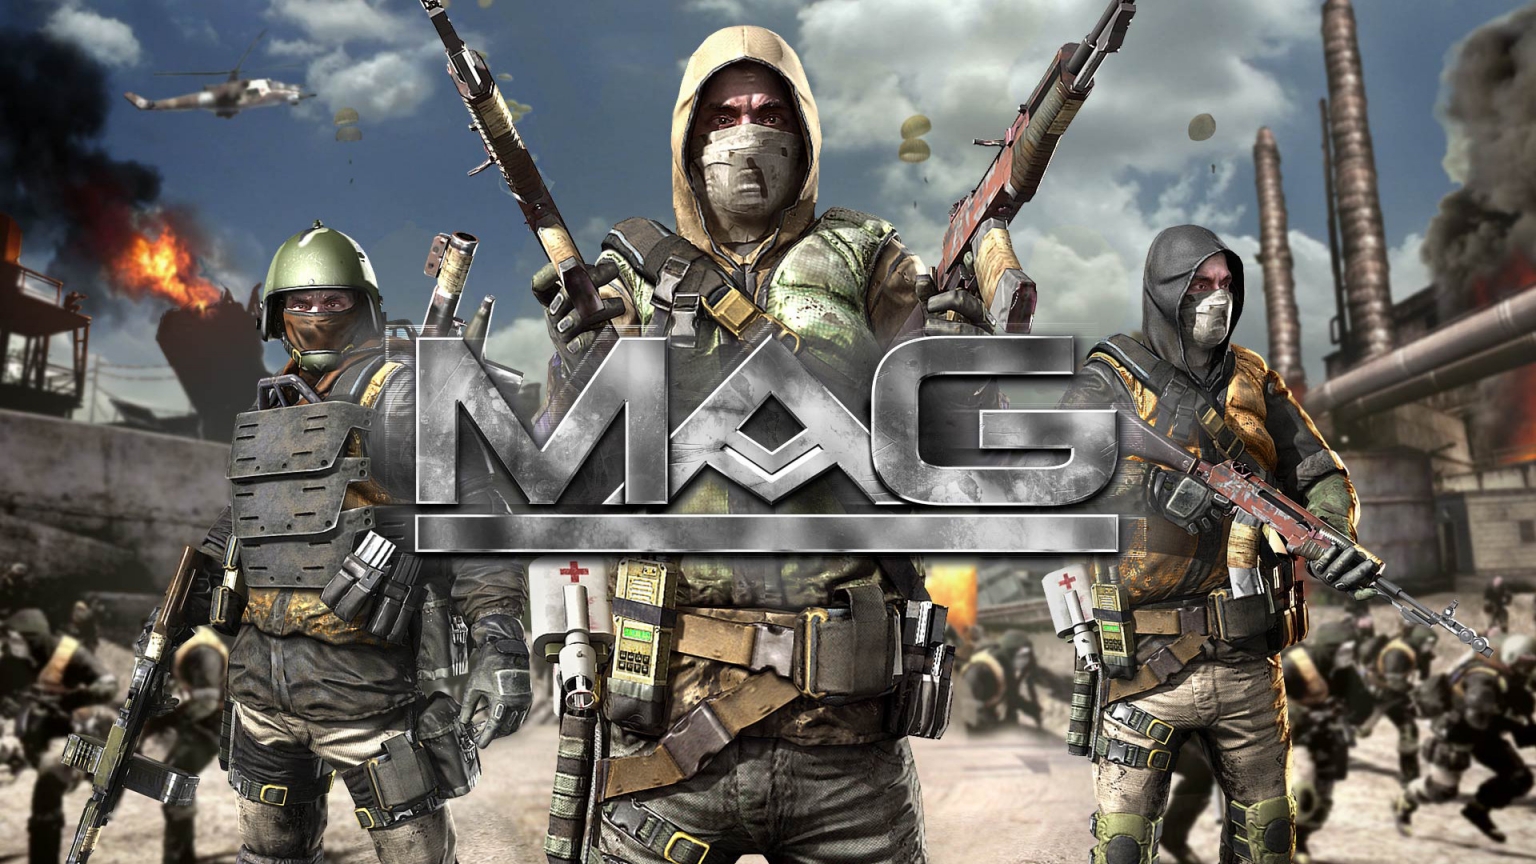 MAG Game for 1536 x 864 HDTV resolution